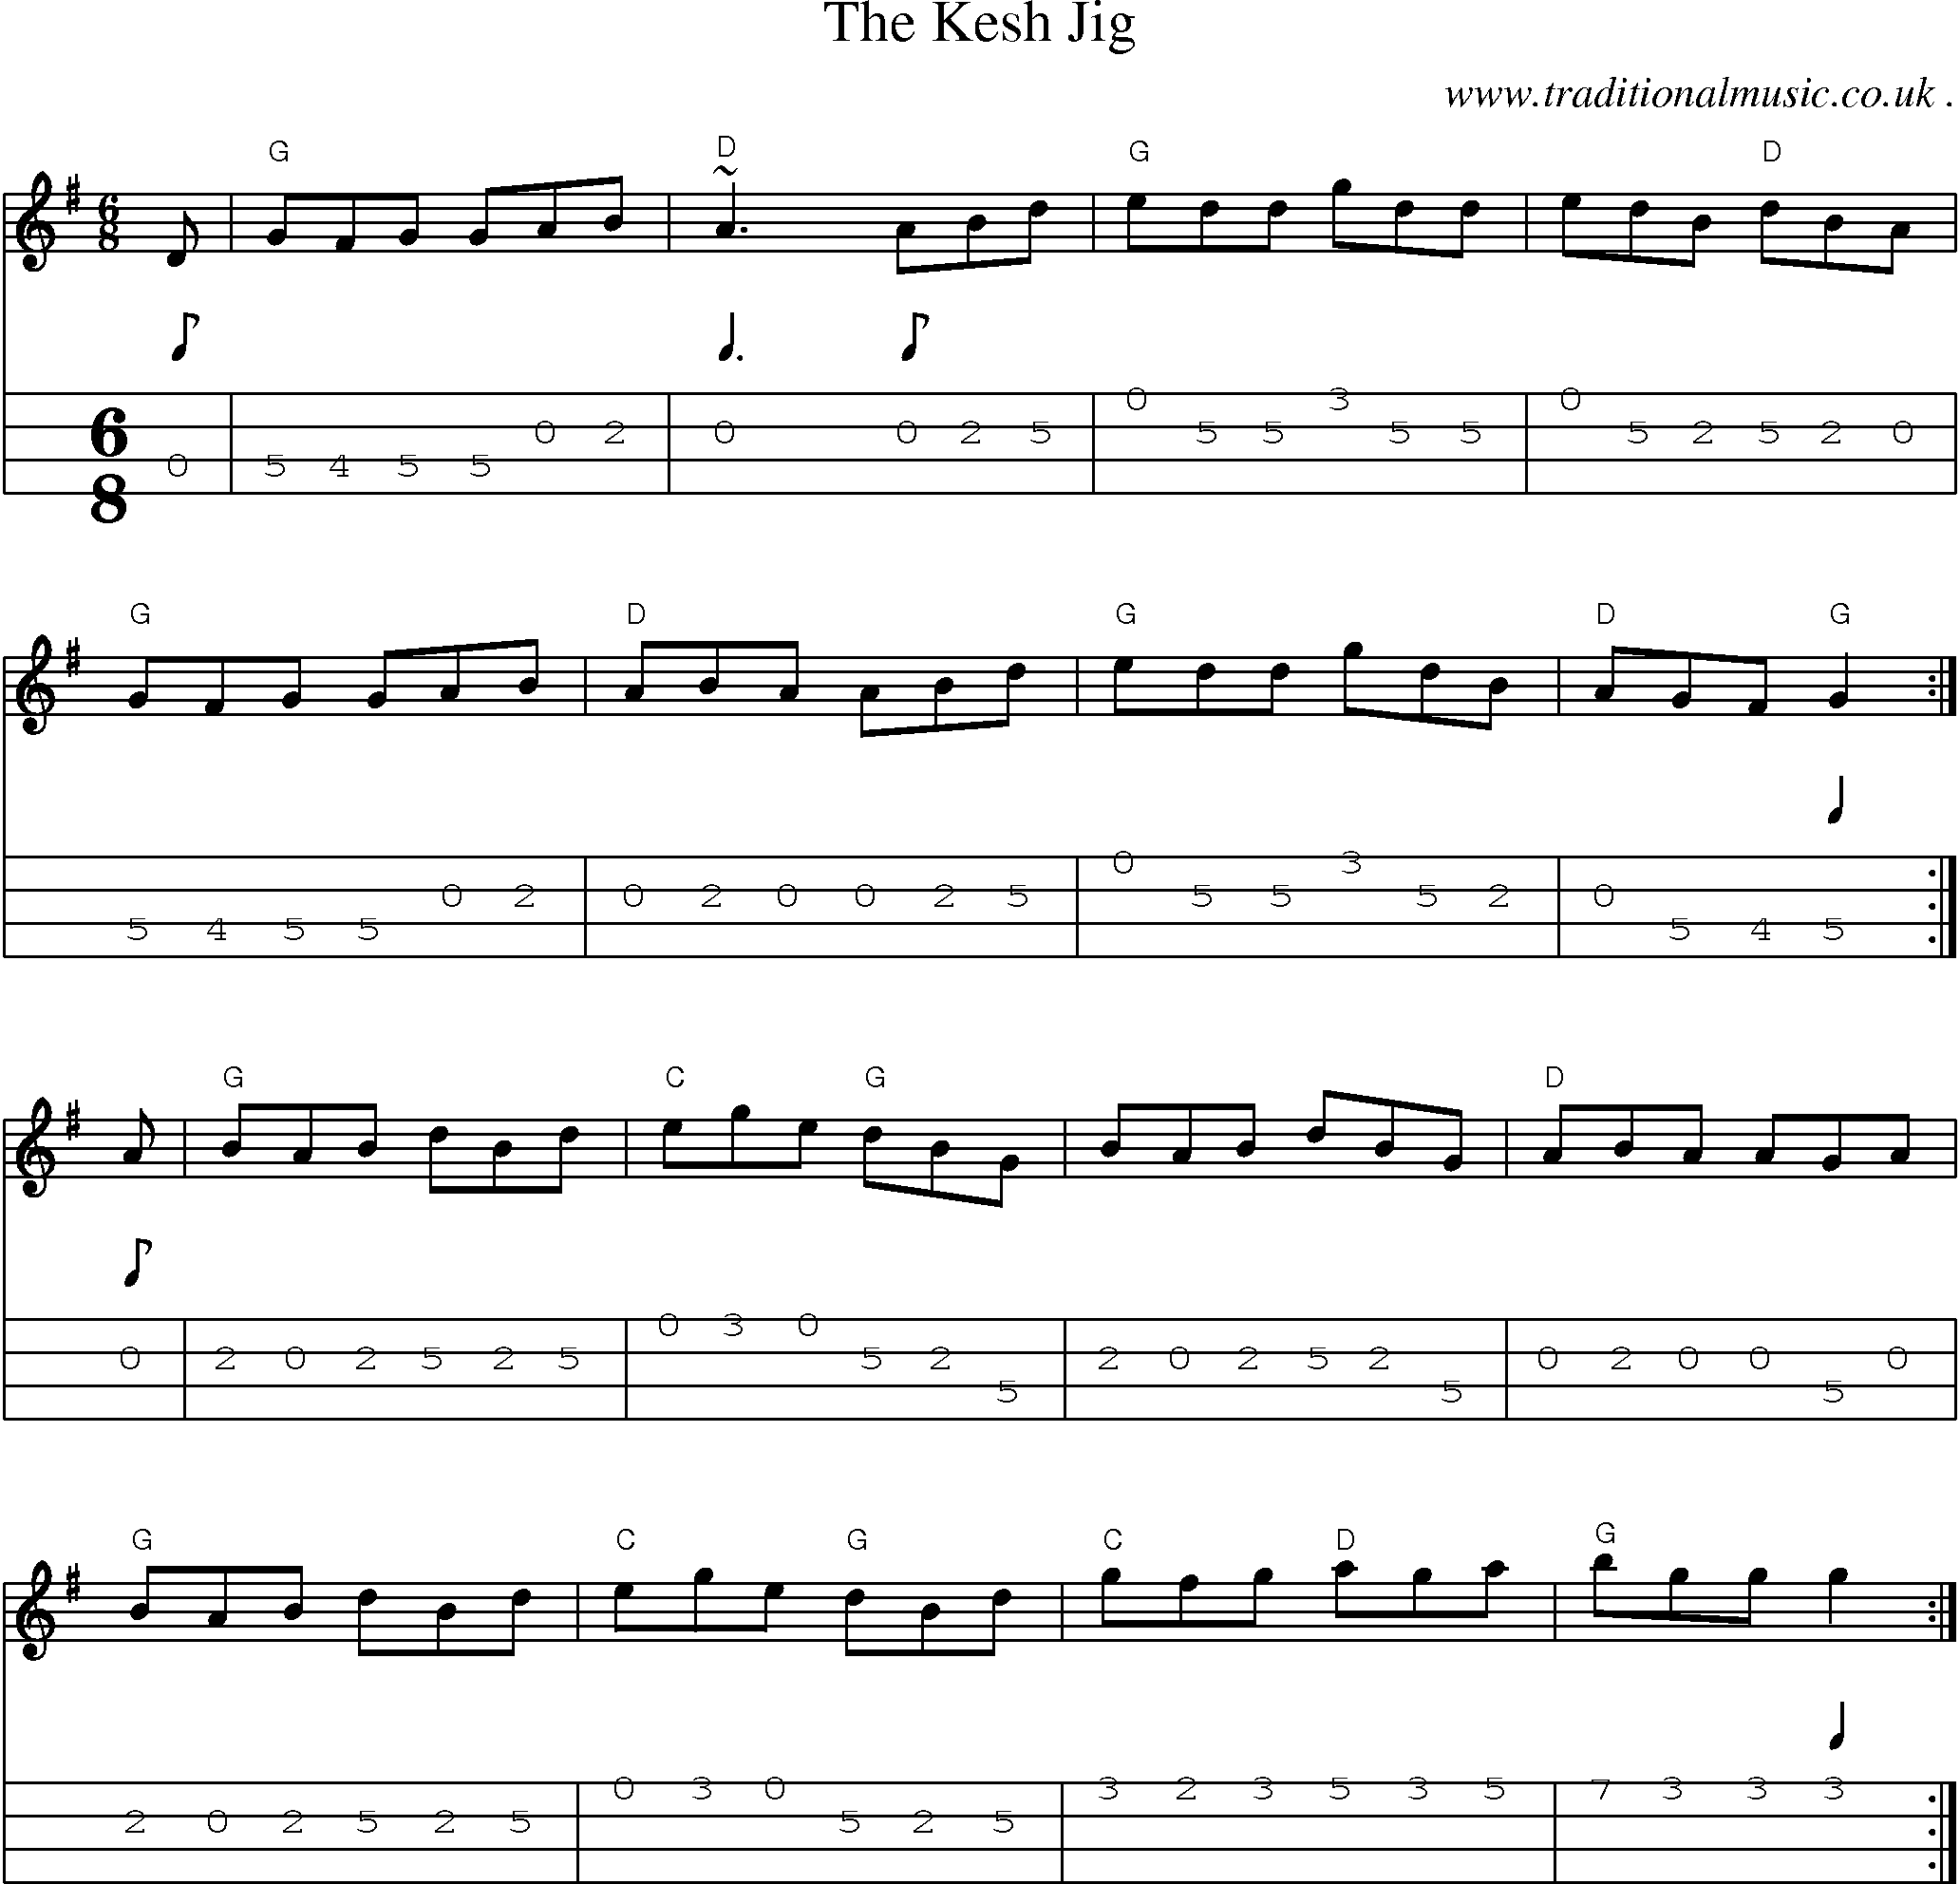 Music Score and Guitar Tabs for The Kesh Jig